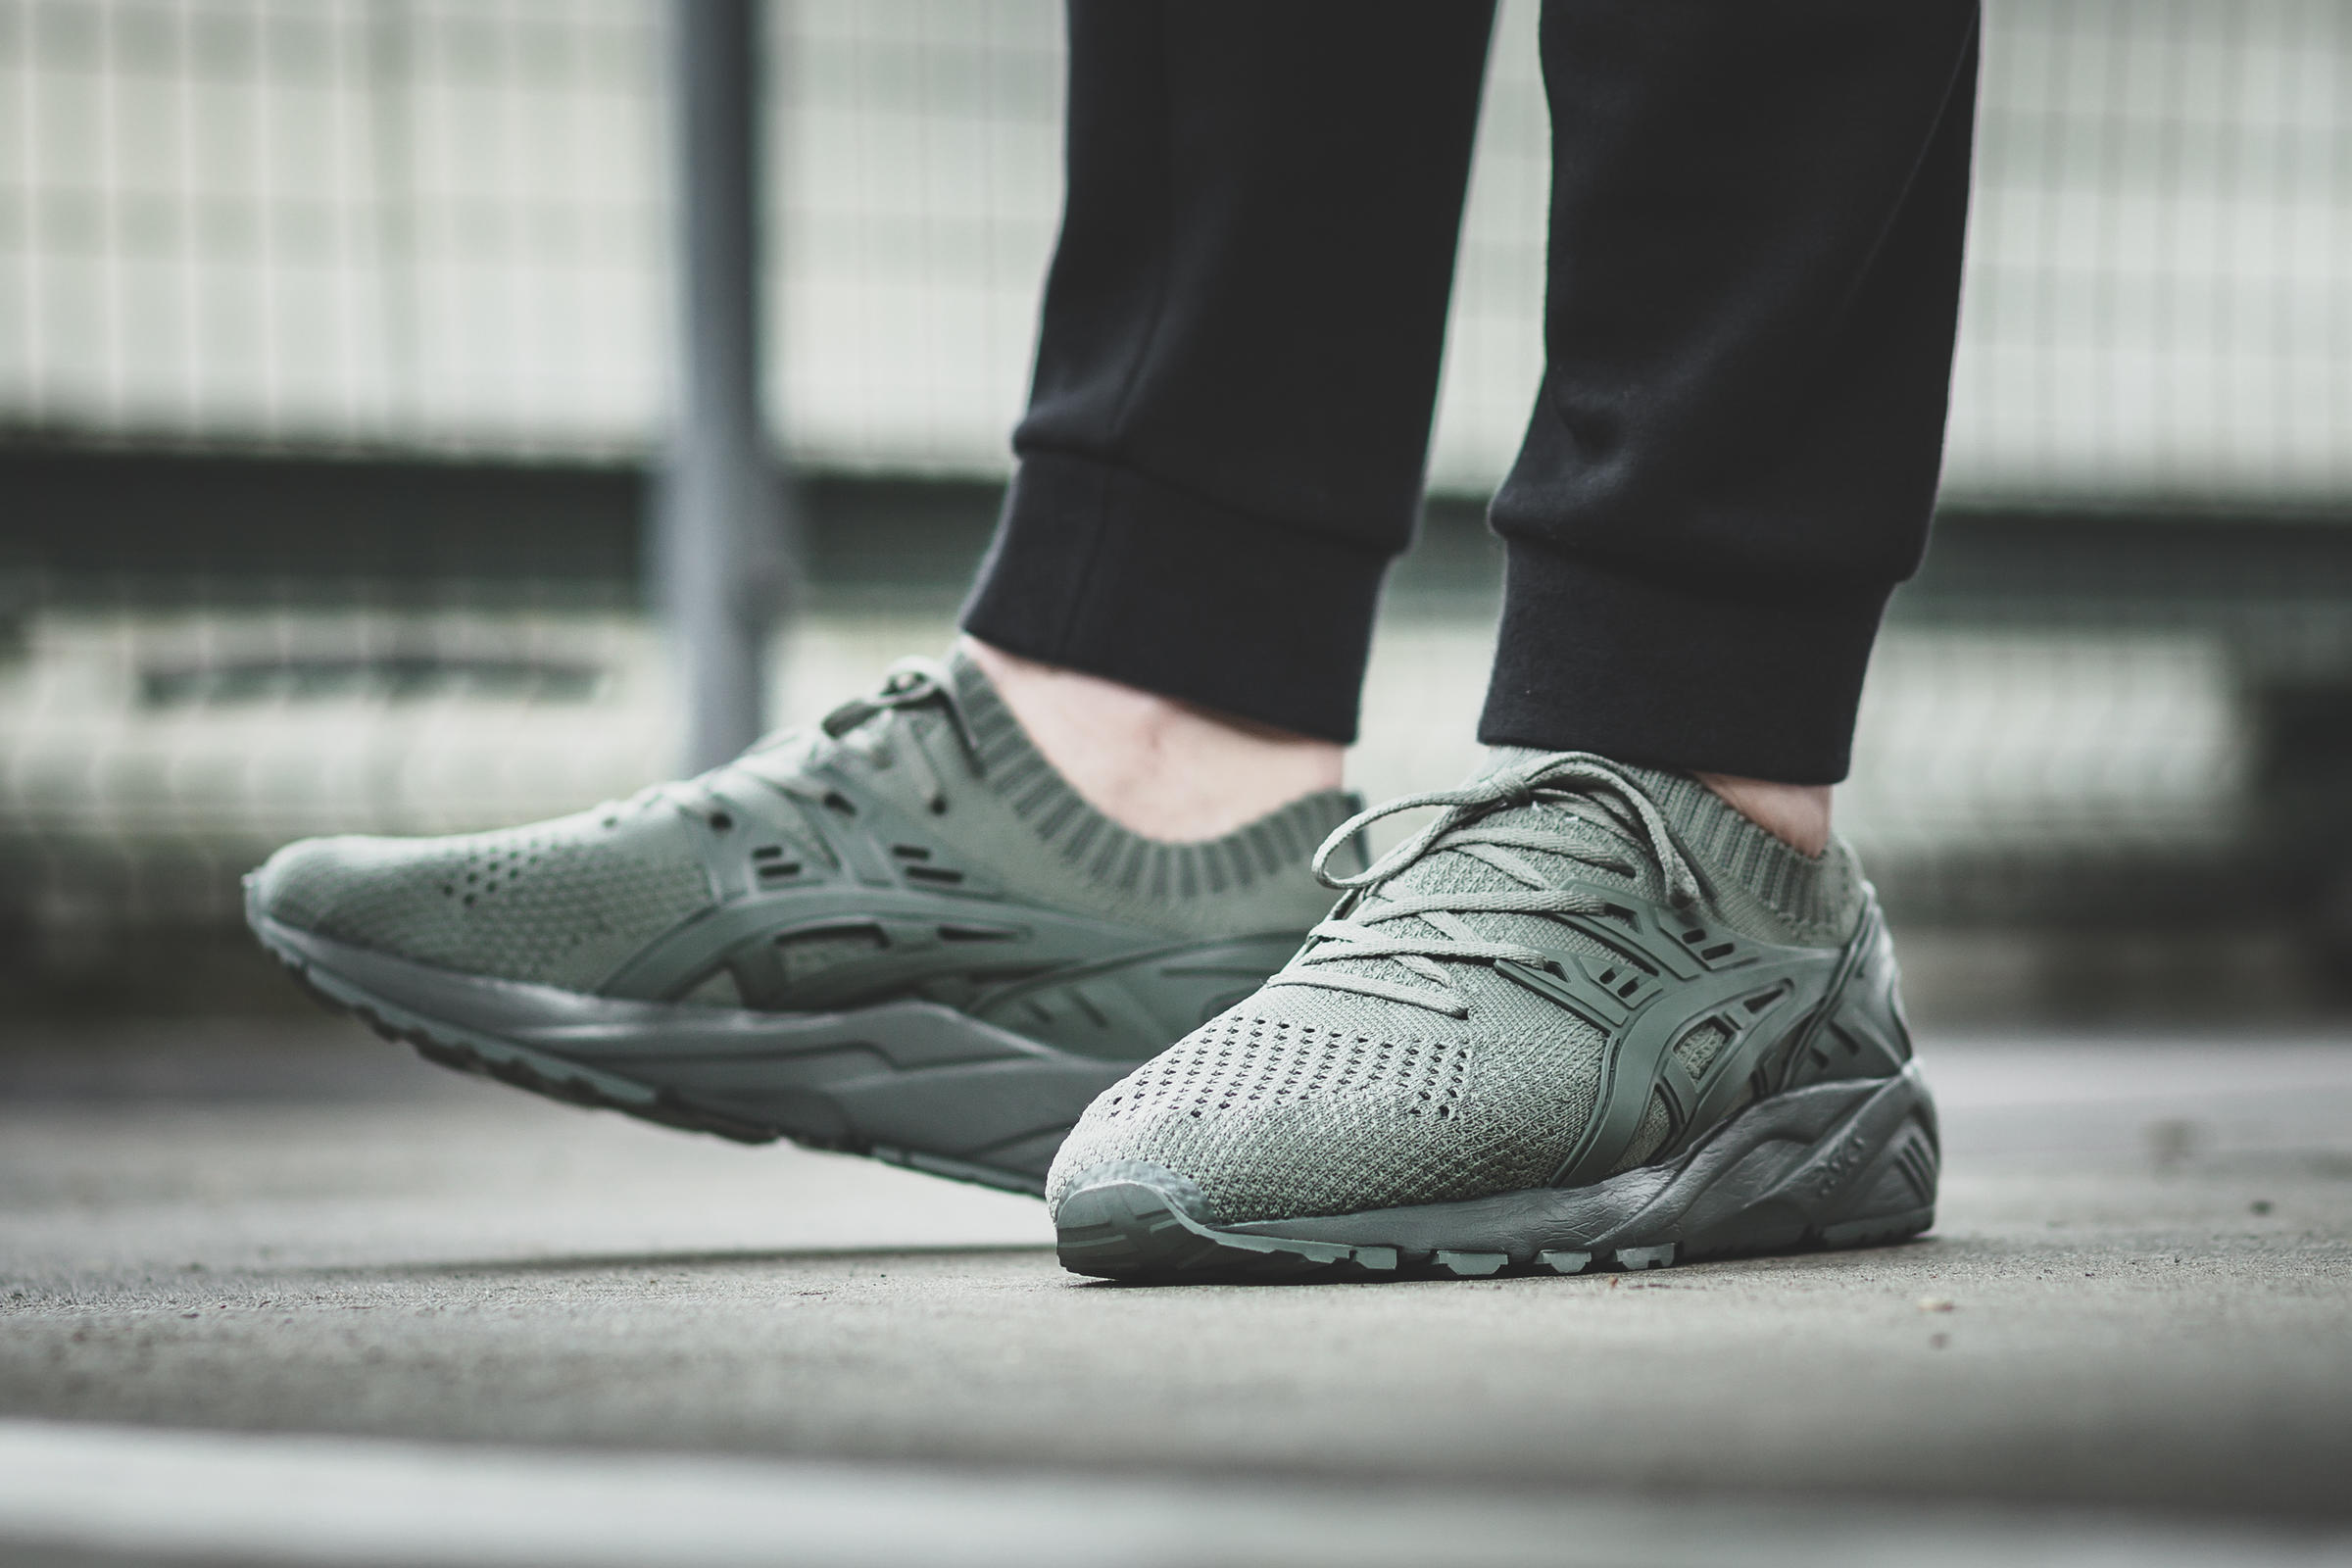 Asics Gel-Kayano Trainer One Piece Knit Pack "Agave Green"